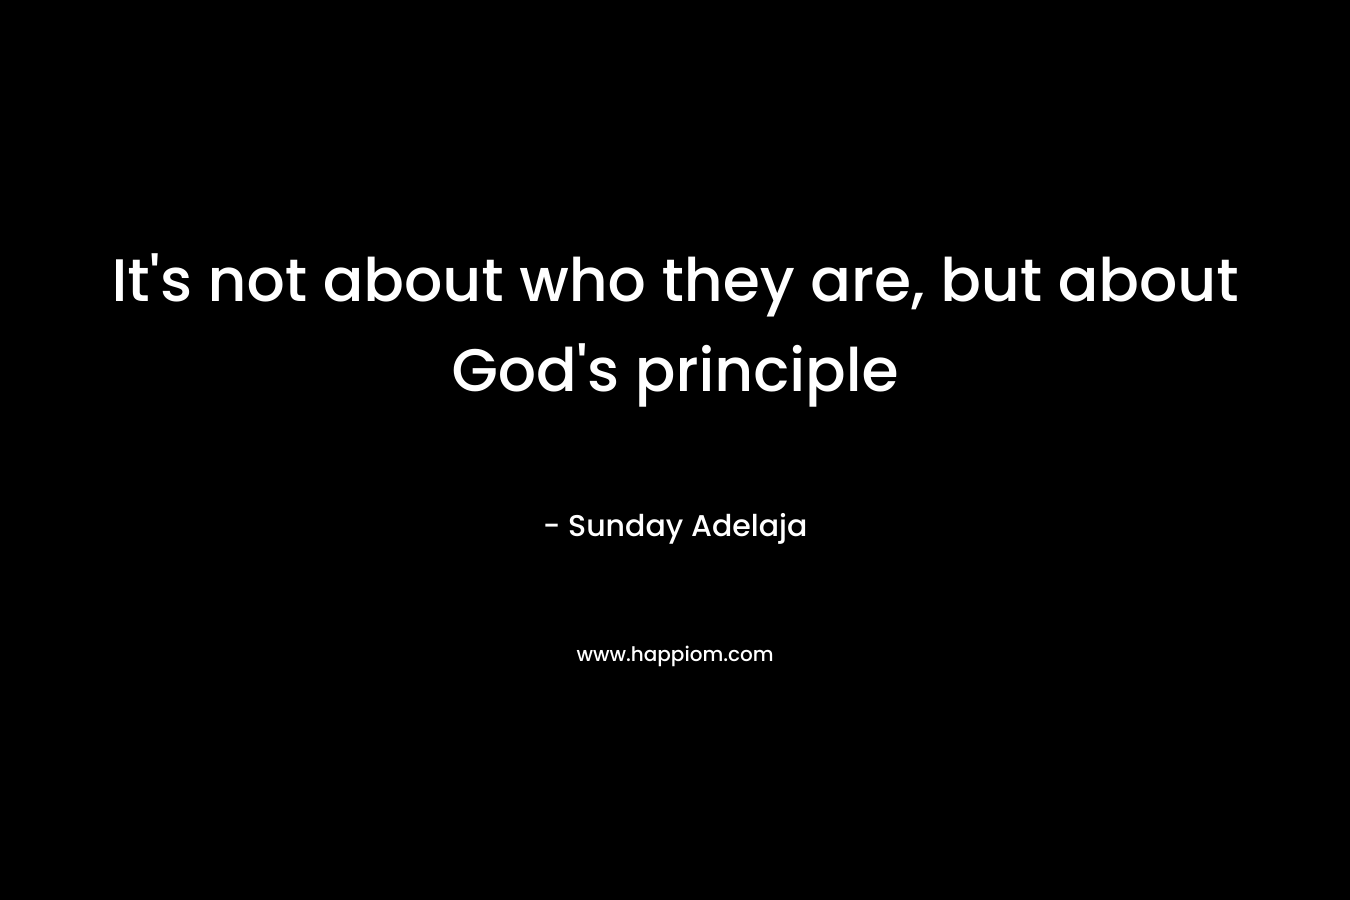 It's not about who they are, but about God's principle